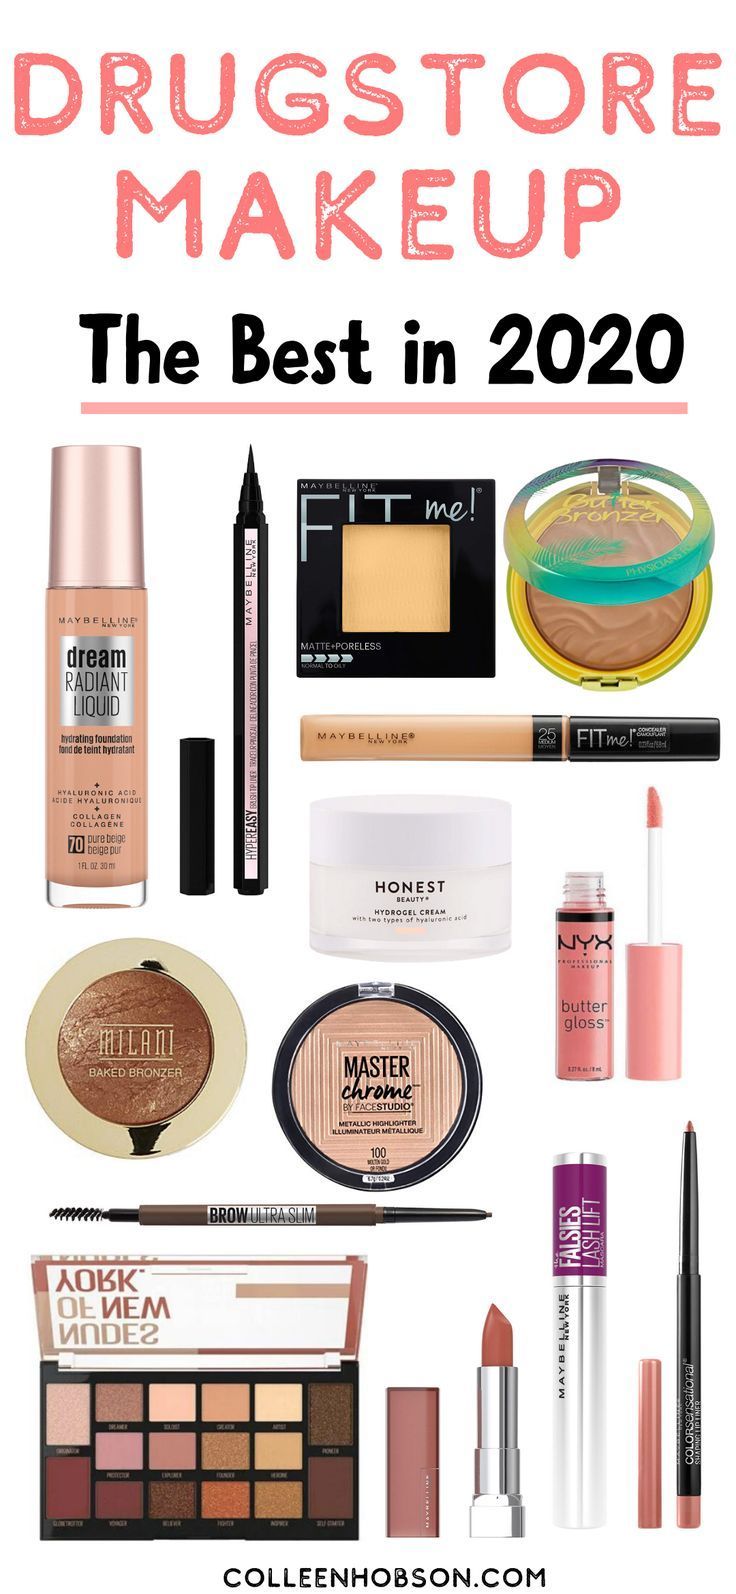 The Best Drugstore Makeup Products In 2020 -   18 drugstore makeup For Teens ideas